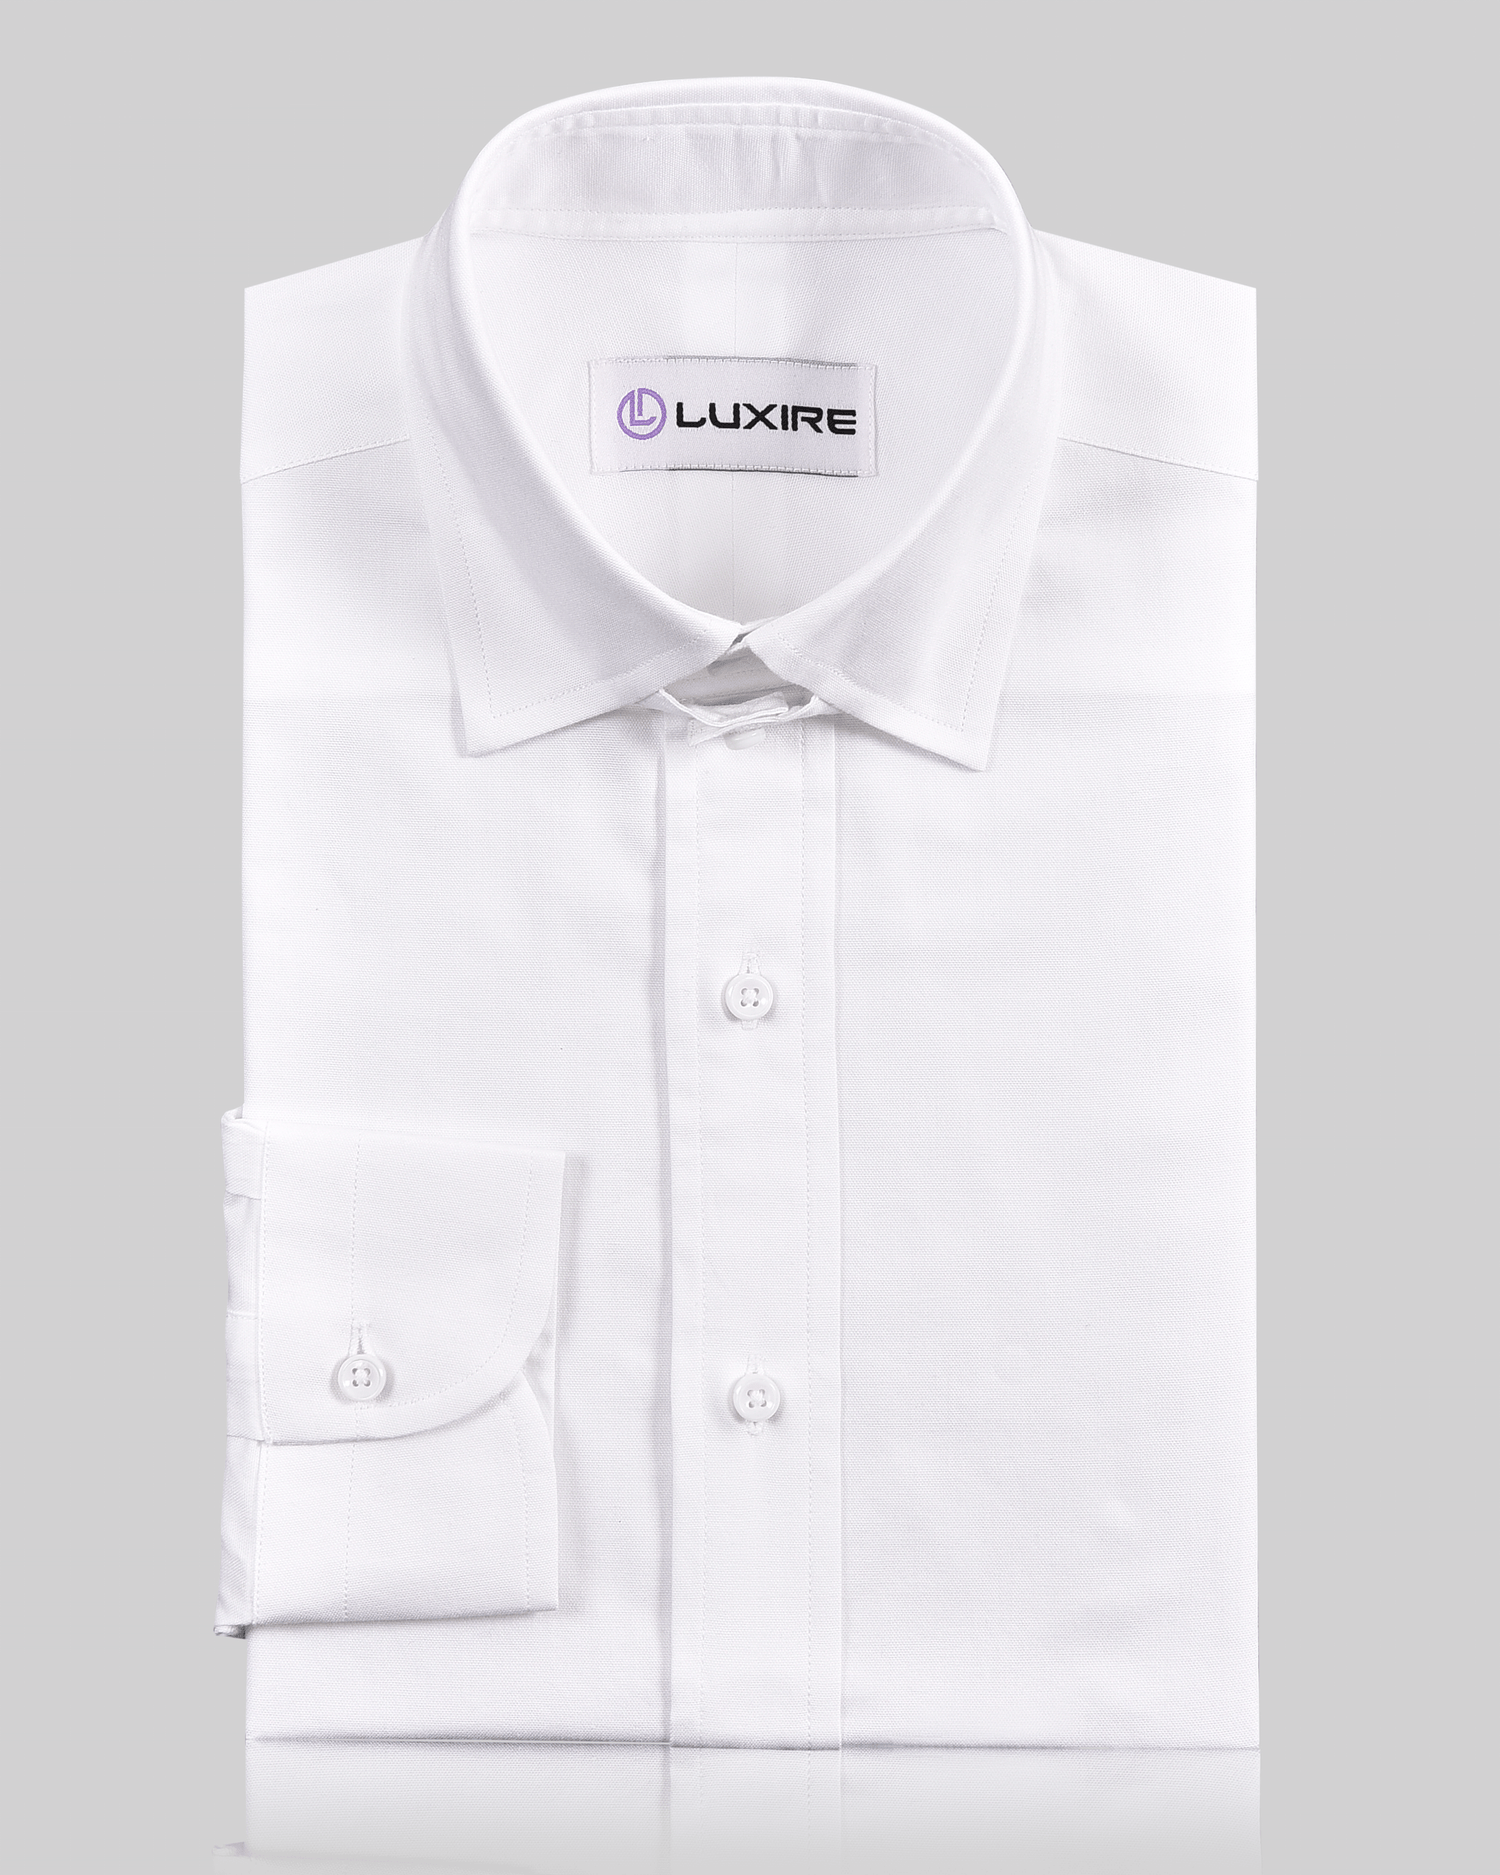 Front of the custom oxford shirt for men by Luxire in pinpoint white